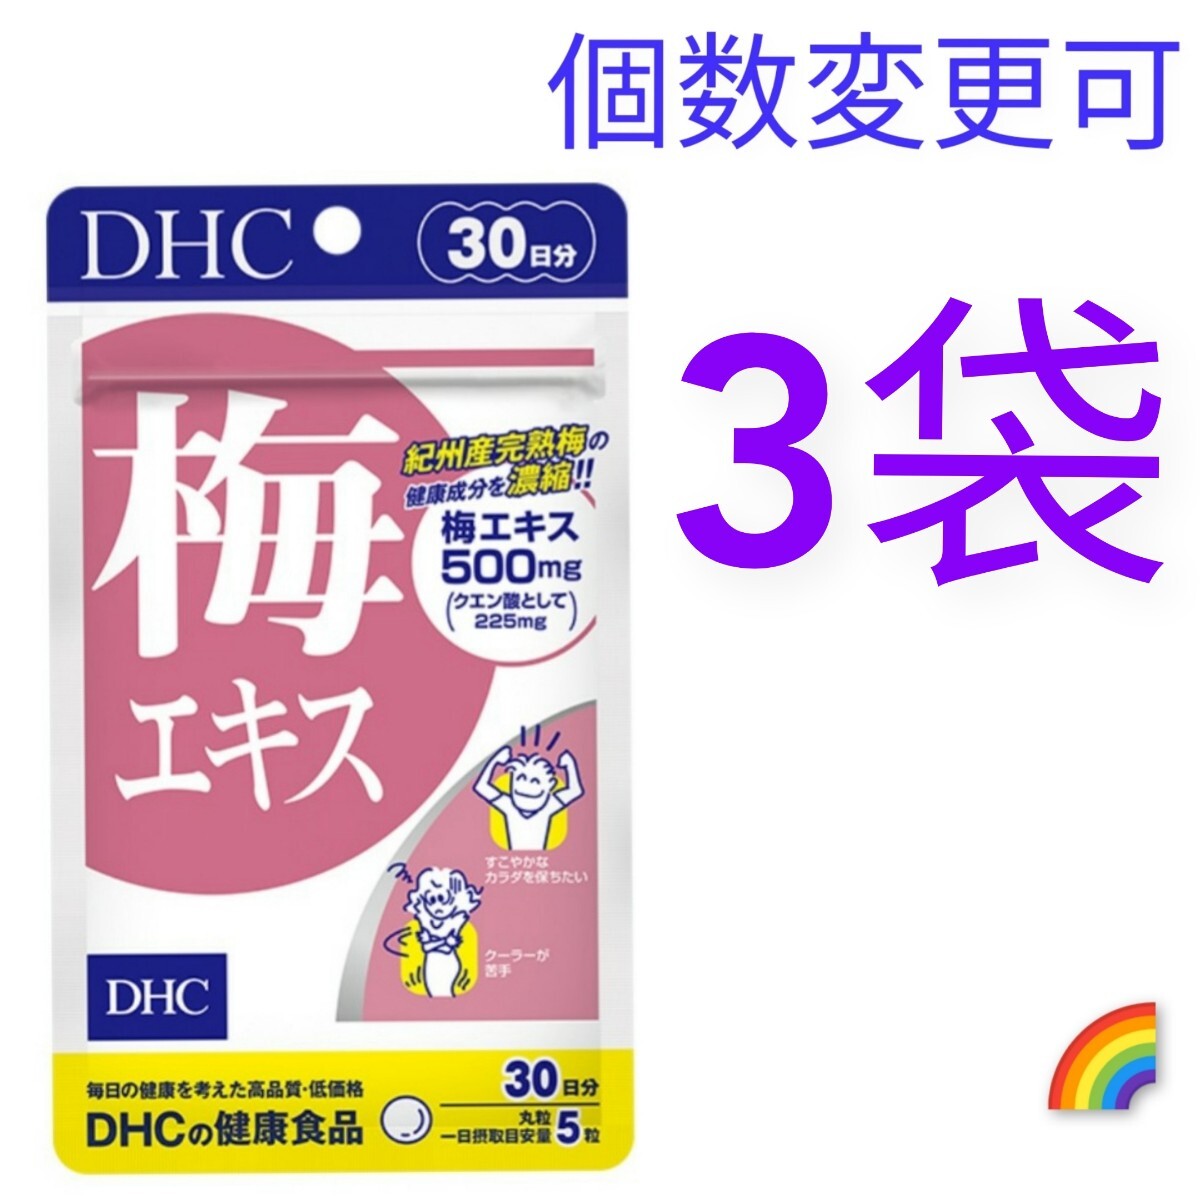  free shipping DHC plum extract 30 day minute ×3 sack number modification possible Y